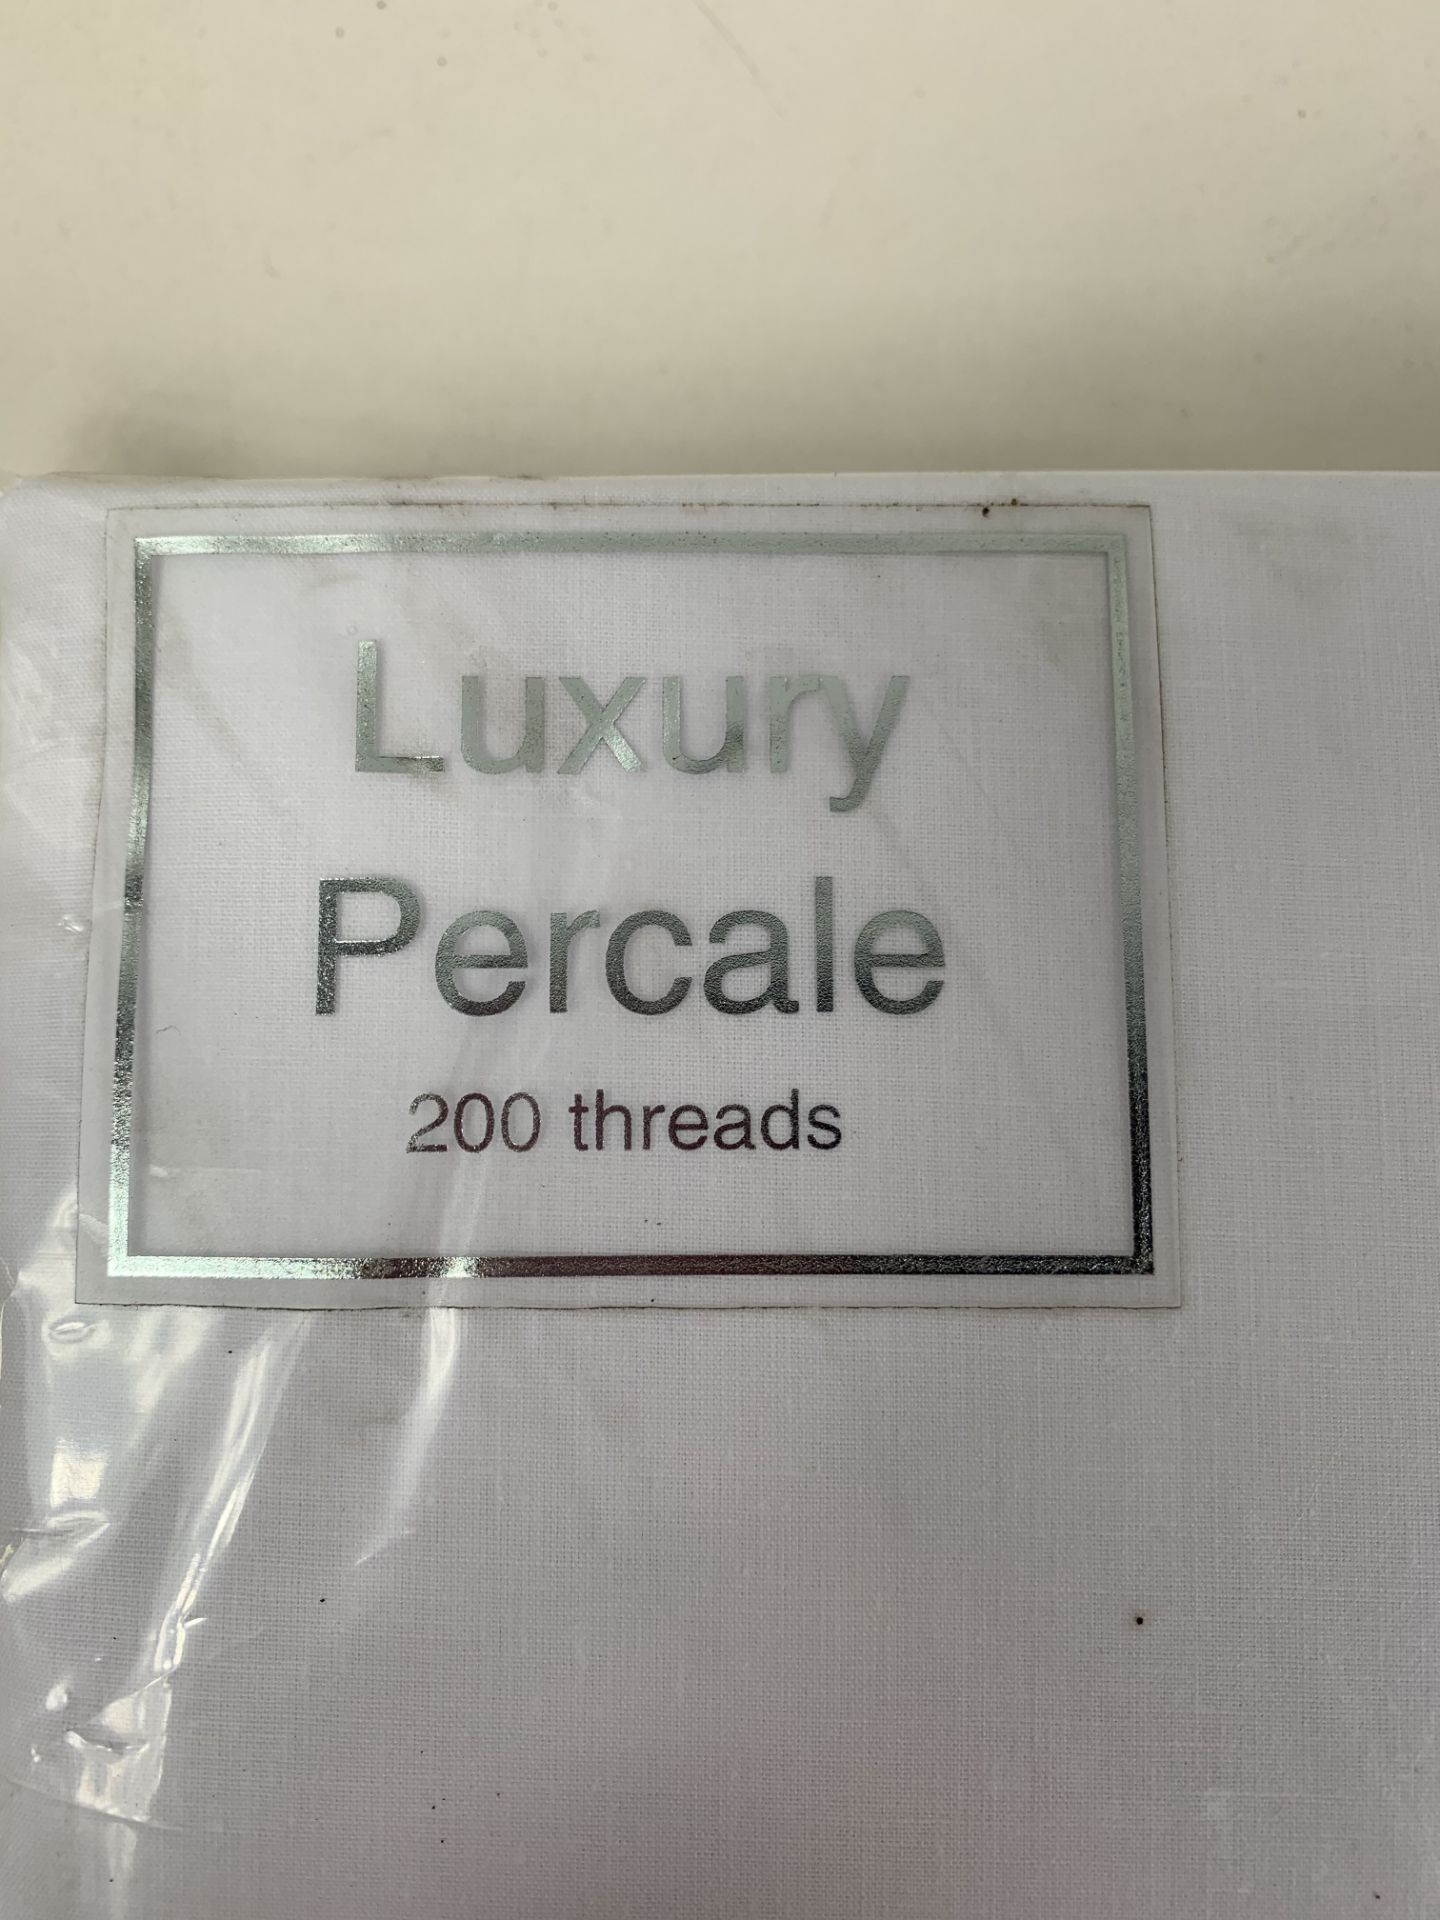 Luxury Percale 200 thredss super king bed duvet cover - Image 2 of 4